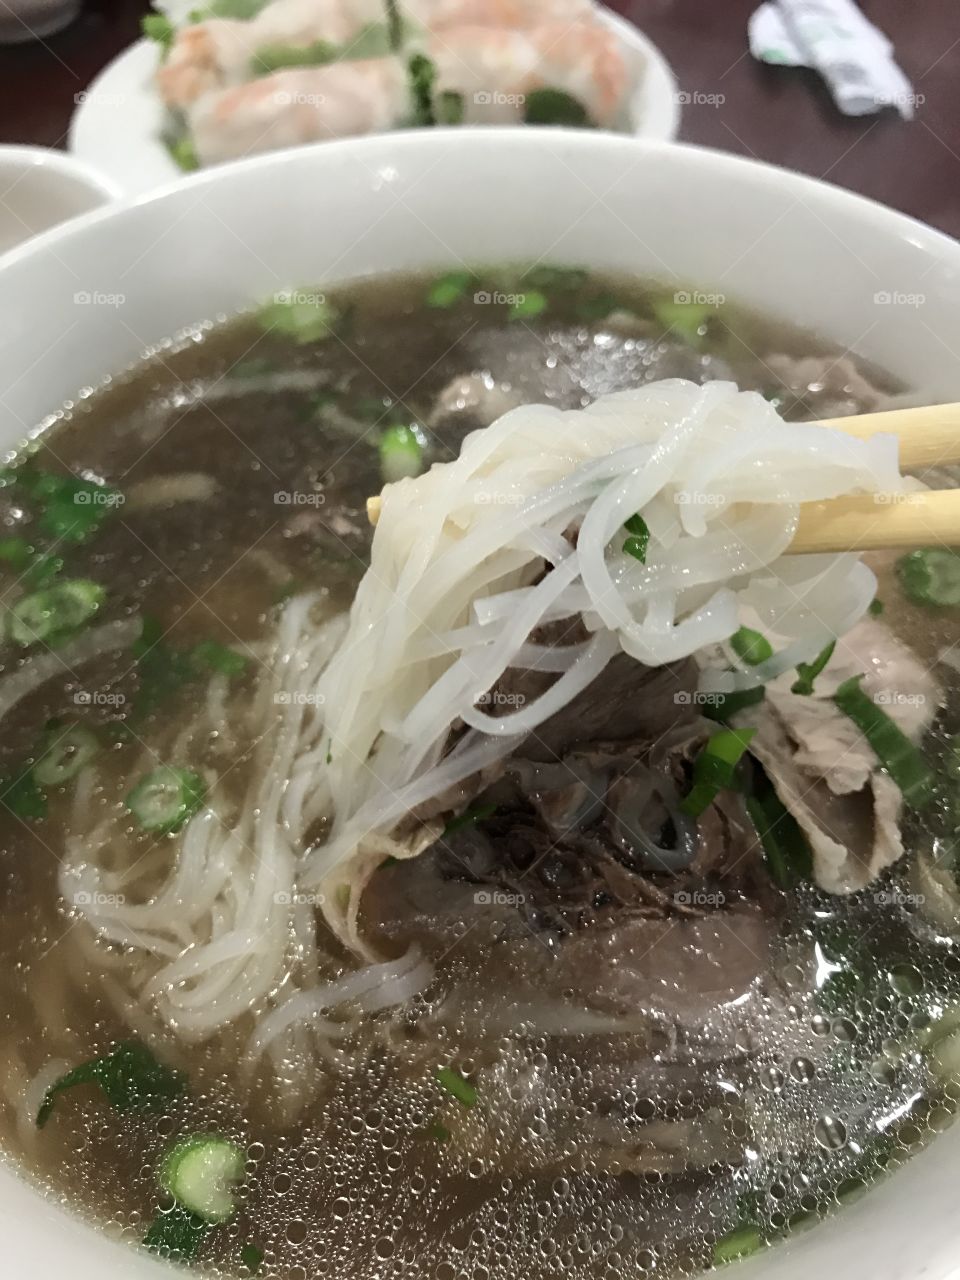 Dac Biet Pho (Special Combo with rare steak well done and brisket flank tendon) at Pho Ha Nam Ninh in San Francisco for Lunch on a rainy Tuesday. 